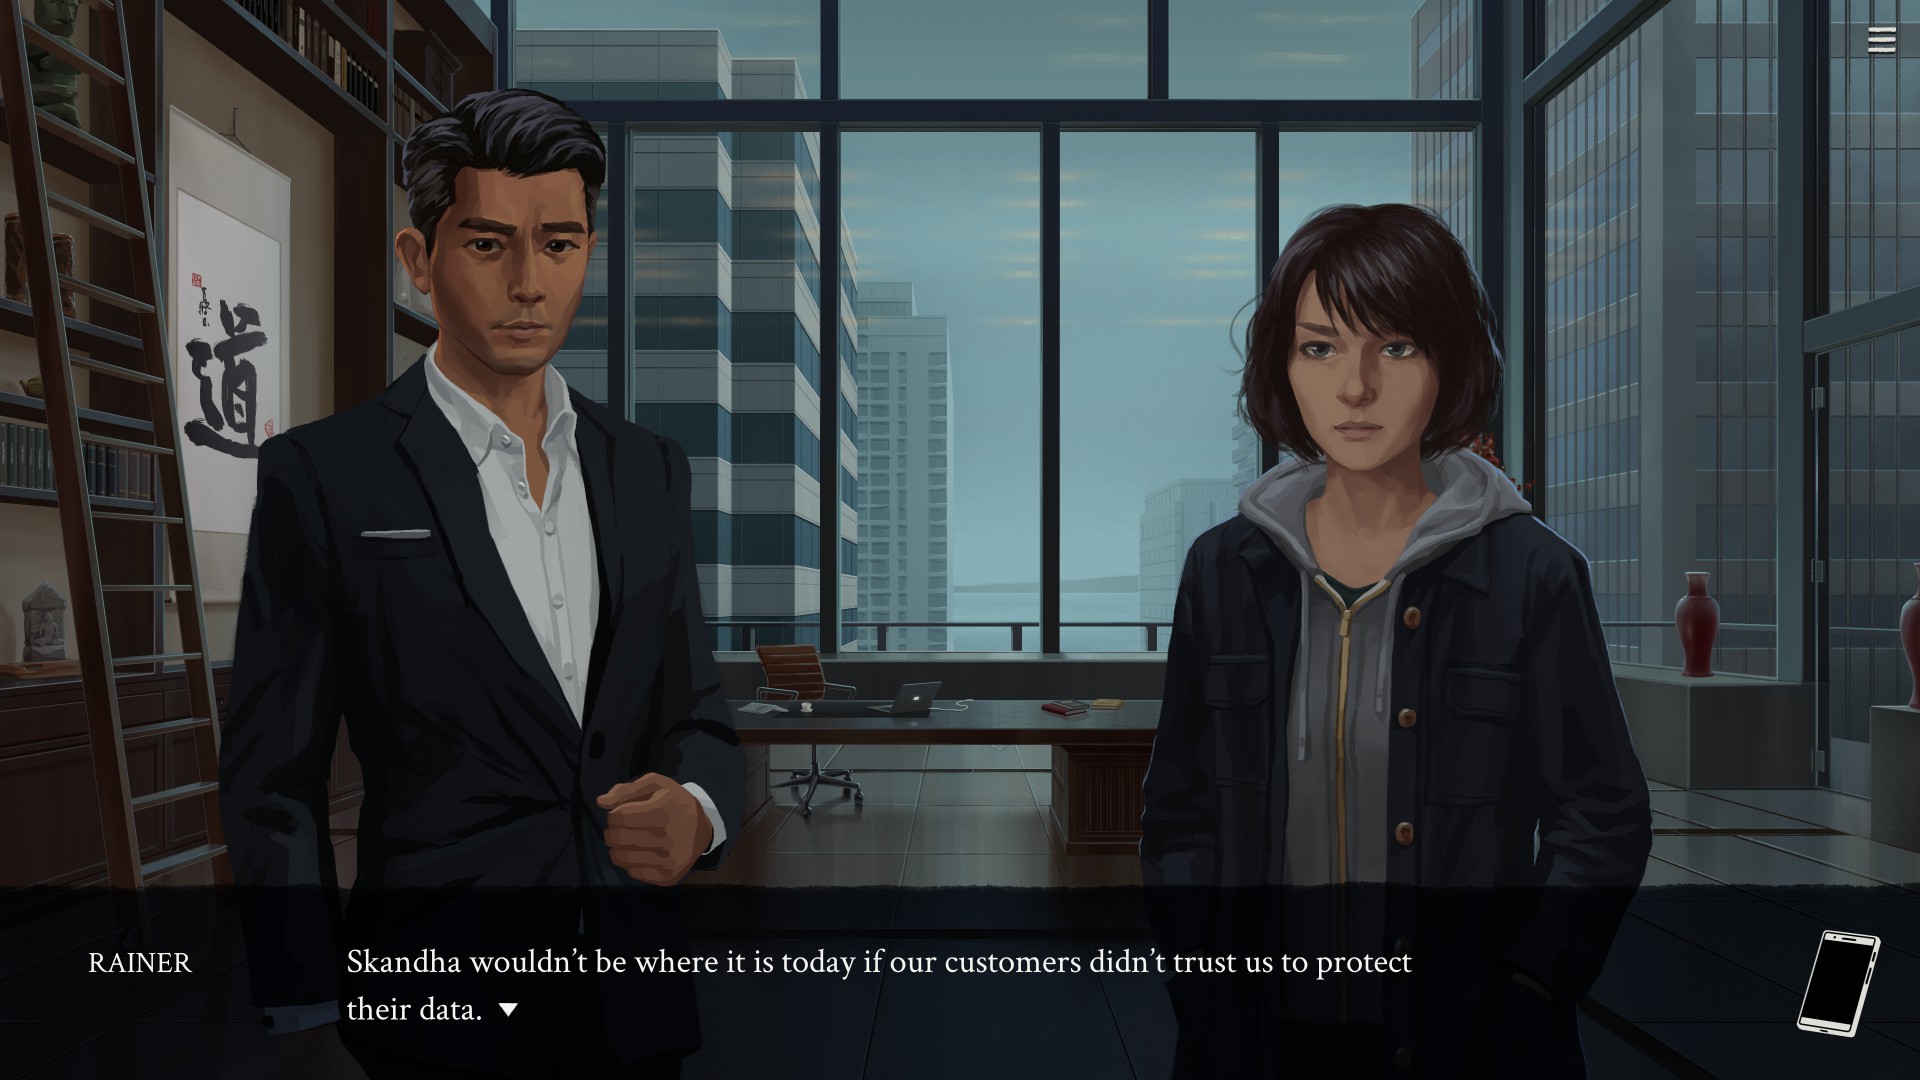 Visual novel Eliza explores the privacy risks of digital therapy | PC Gamer